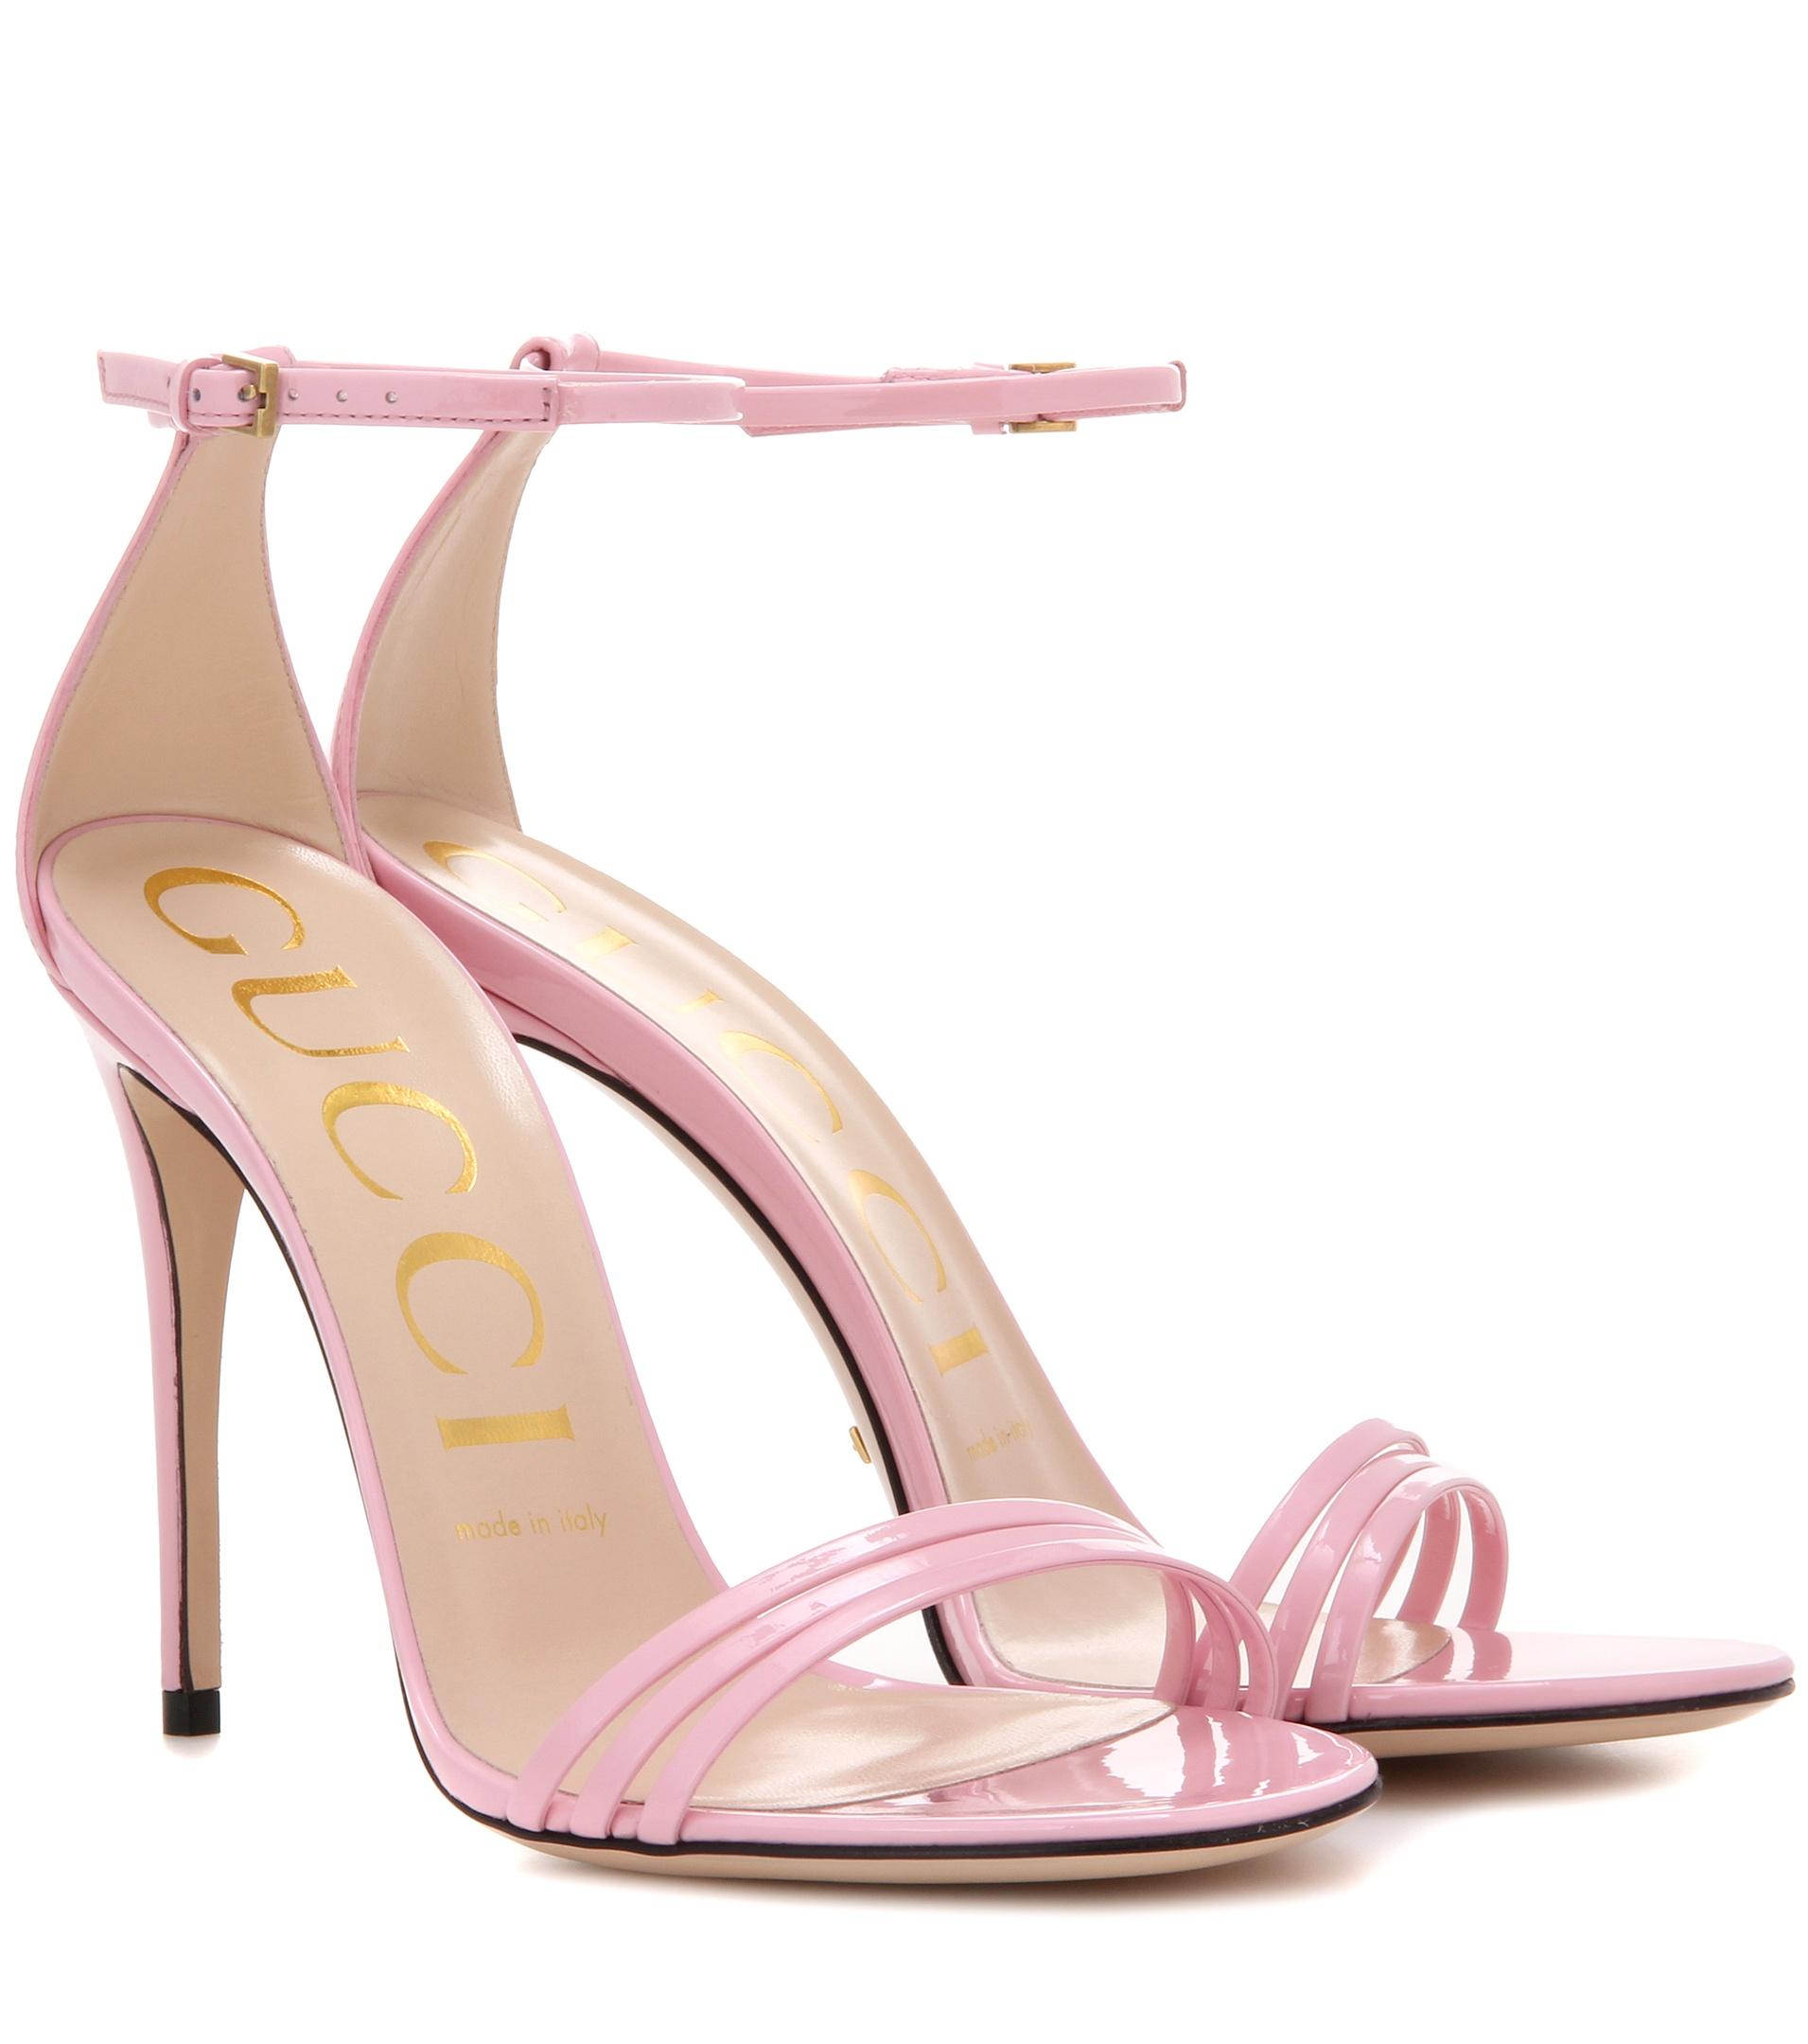 Gucci Patent Leather Sandals in Pink - Lyst